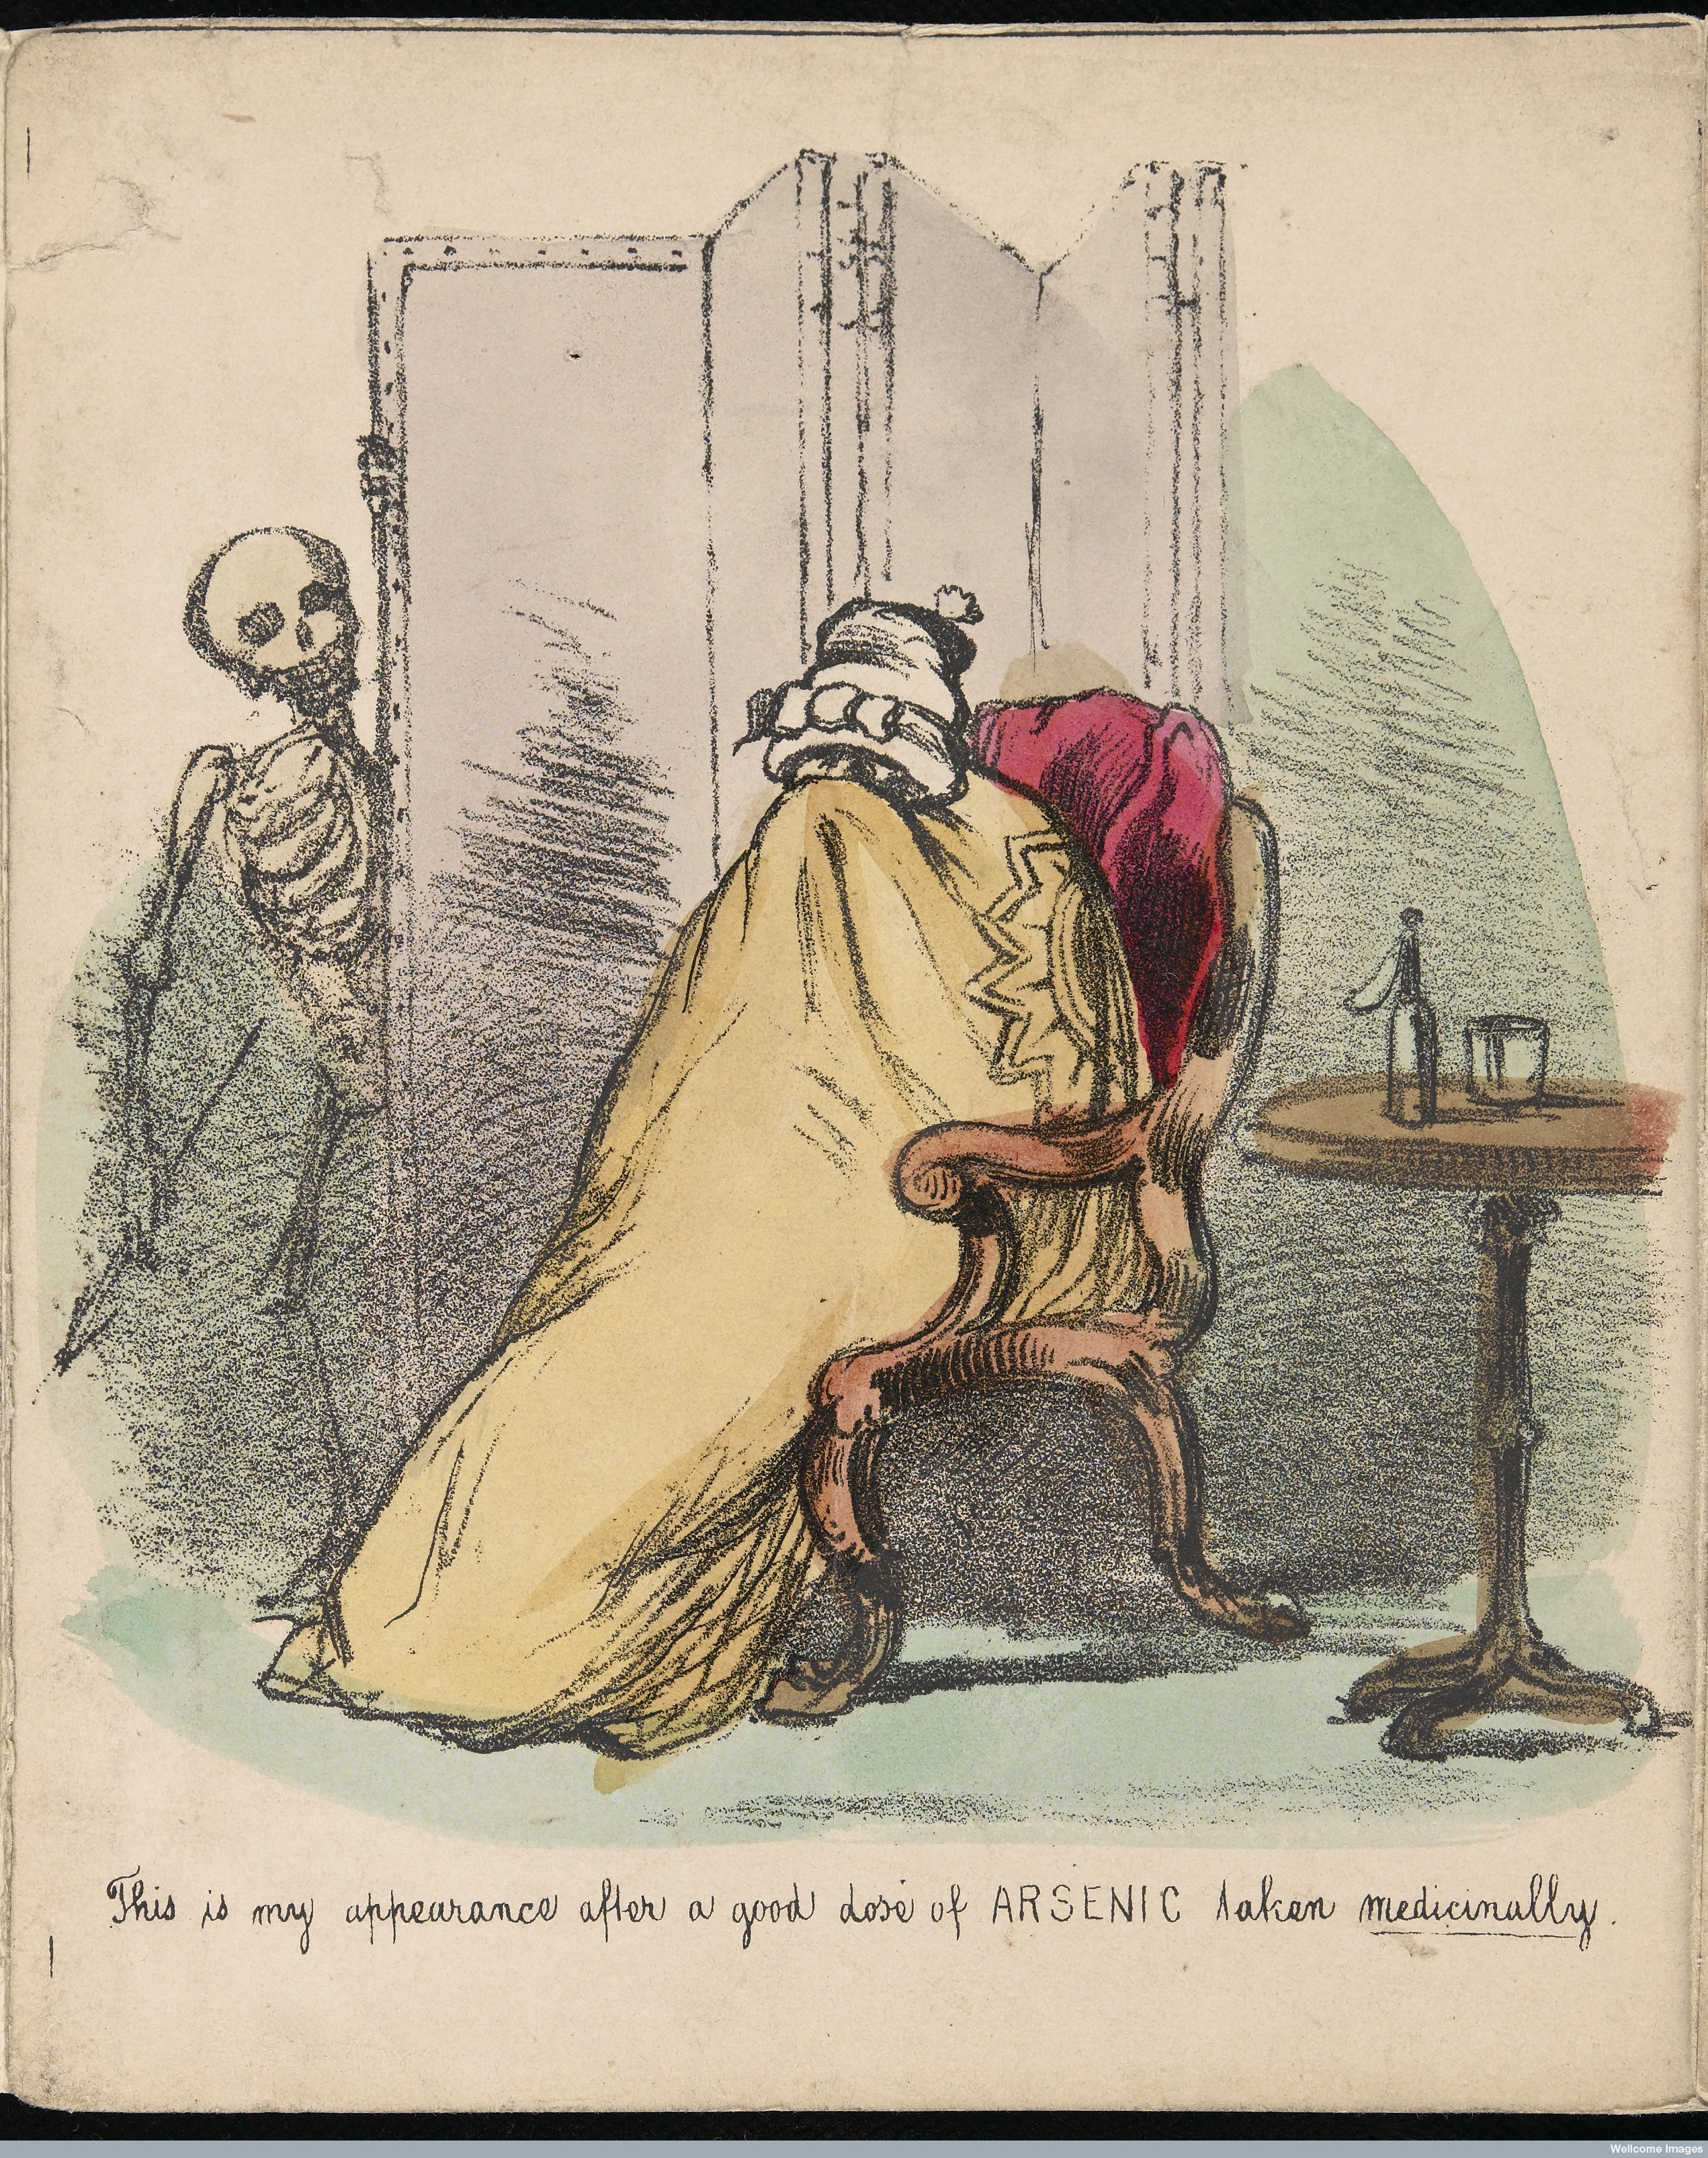 A patient suffering adverse effects of arsenic treatment - Wellcome Collection